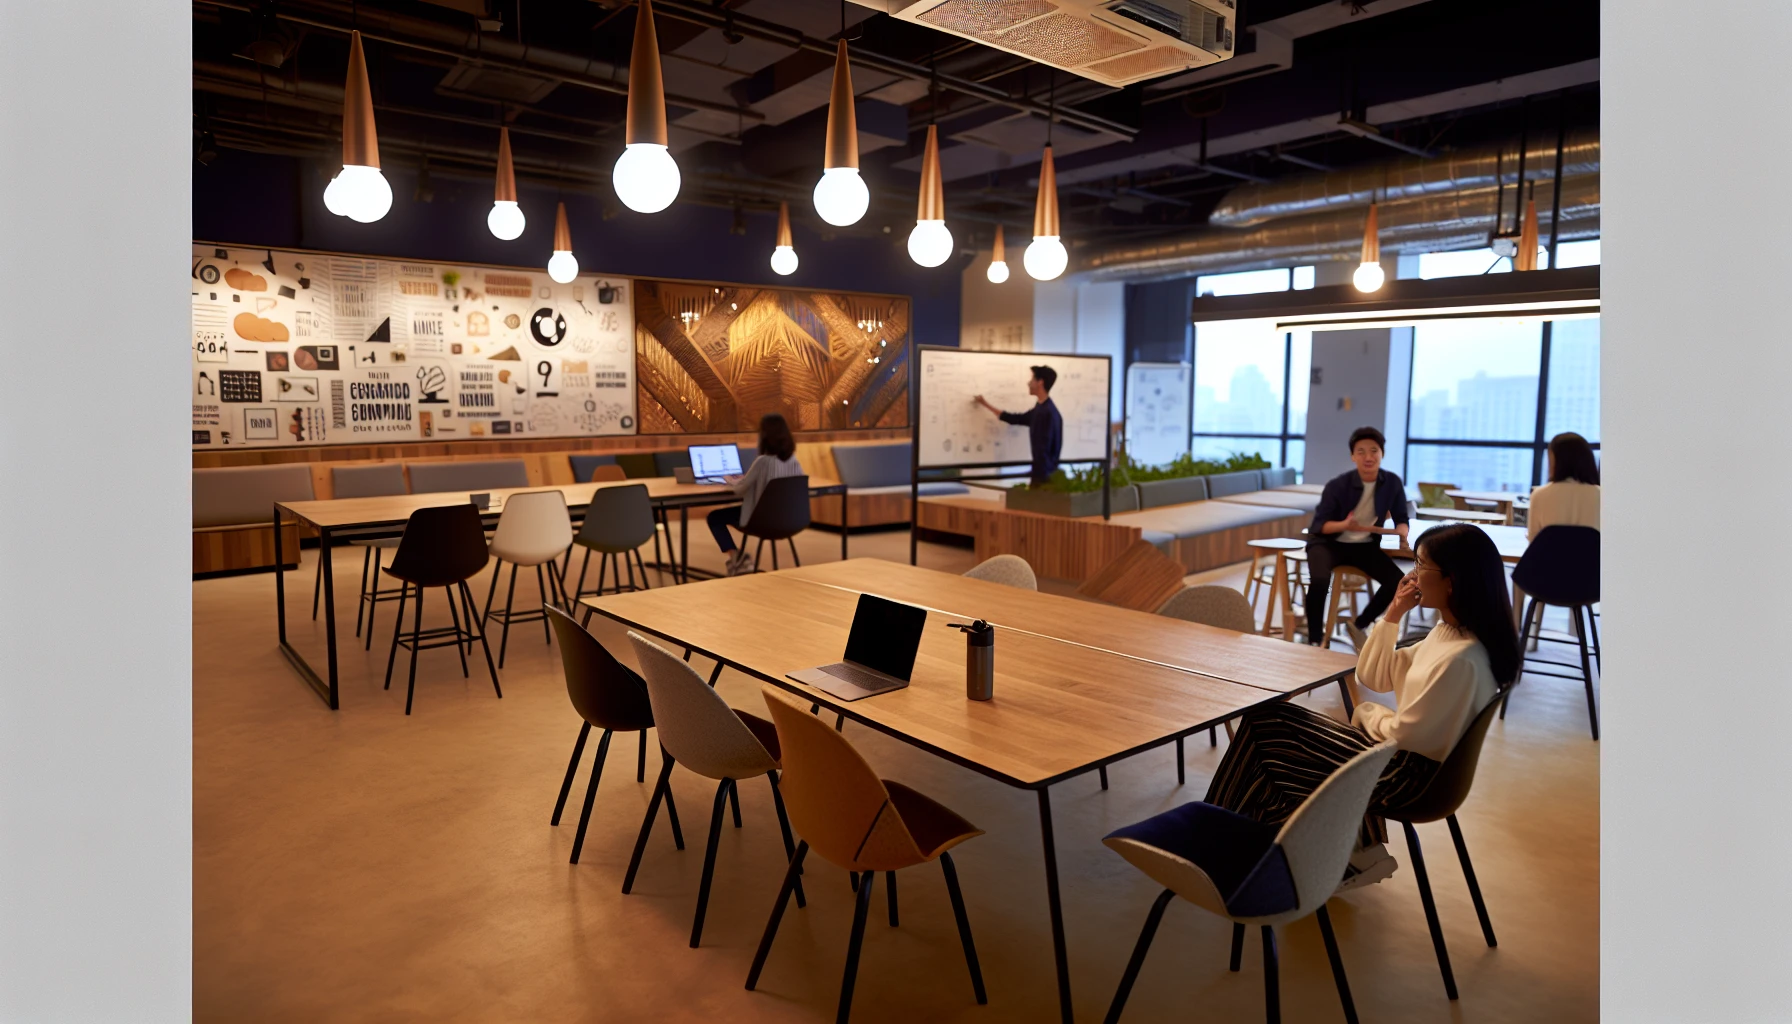 A creative workspace with innovative design elements, representing unique and innovative benefits offered by companies.